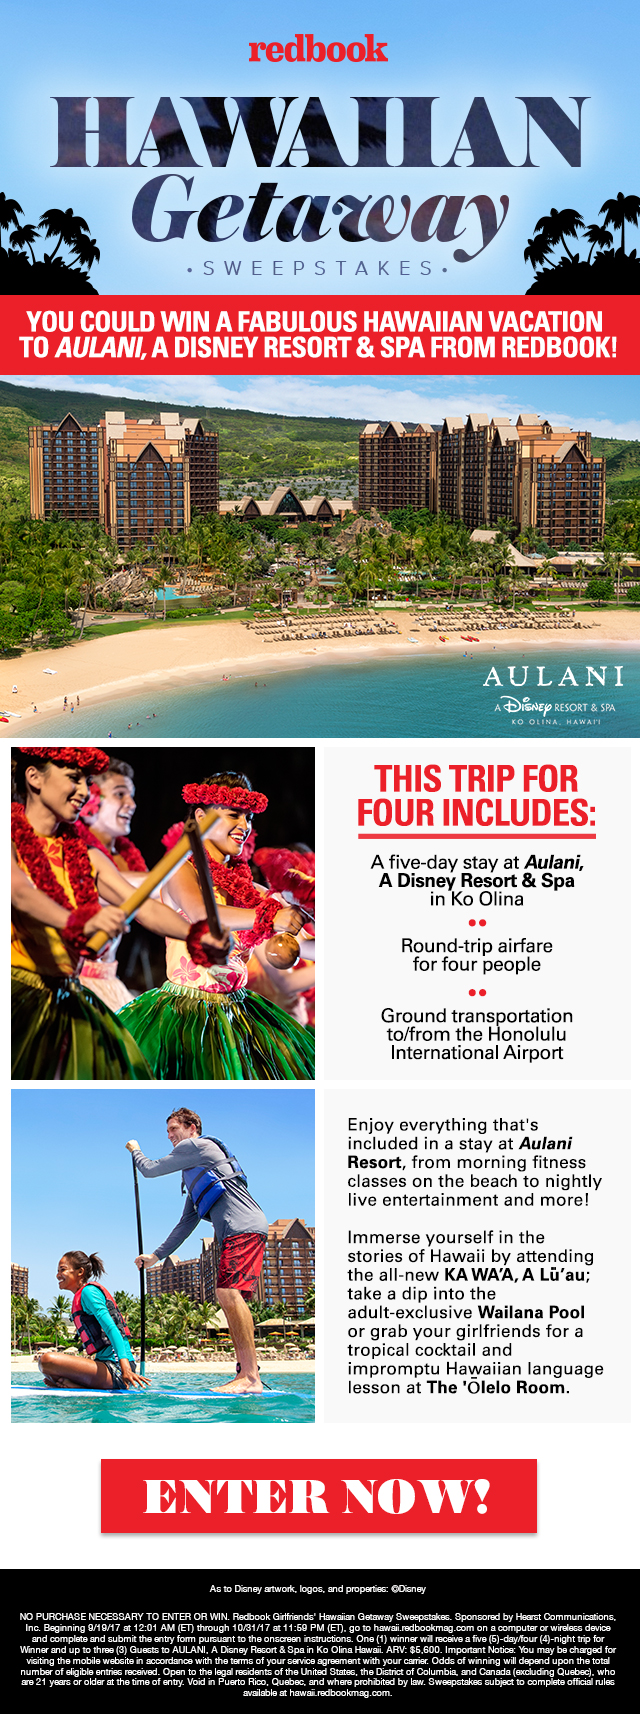 Redbook Hawaiian Getaway Sweepstakes. You could win a fabulous Hawaiian vacation to Aulani, A Disney Resort & Spa from Redbook! This trip for four includes: A five-day stay at Aulani, A Disney Resort & Spa in Ko Olina; roundtrip airfare for four people; Ground transportation to/from the Honolulu International Airport. Enjoy everything that's included in a stay at Aulani Resort, from morning fitness classes on the beach to nightly live entertainment and more! Immerse yourself in the stories of Hawaii by attending the all-new KA WA'A, A Lu'au; take a dip into the adult-exclusive Wailana Pool or grab your girlfriends for a tropical cocktail and impromptu Hawaiian language lesson at The 'Olelo Room. Enter now! As to Disney artwork, logos, and properties: ©Disney NO PURCHASE NECESSARY TO ENTER OR WIN. Redbook Girlfriends' Hawaiian Getaway Sweepstakes. Sponsored by Hearst Communications, Inc. Beginning 9/19/17 at 12:01 AM (ET) through 10/31/17 at 11:59 PM (ET), go to hawaii.redbookmag.com on a computer or wireless device and complete and submit the entry form pursuant to the onscreen instructions. One (1) winner will receive a five (5)-day/four (4)-night trip for Winner and up to three (3) Guests to AULANI, A Disney Resort & Spa in Ko Olina Hawaii. ARV: $5,600. Important Notice: You may be charged for visiting the mobile website in accordance with the terms of your service agreement with your carrier. Odds of winning will depend upon the total number of eligible entries received. Open to the legal residents of the United States, the District of Columbia, and Canada (excluding Quebec), who are 21 years or older at the time of entry. Void in Puerto Rico, Quebec, and where prohibited by law. Sweepstakes subject to complete official rules available at hawaii.redbookmag.com.